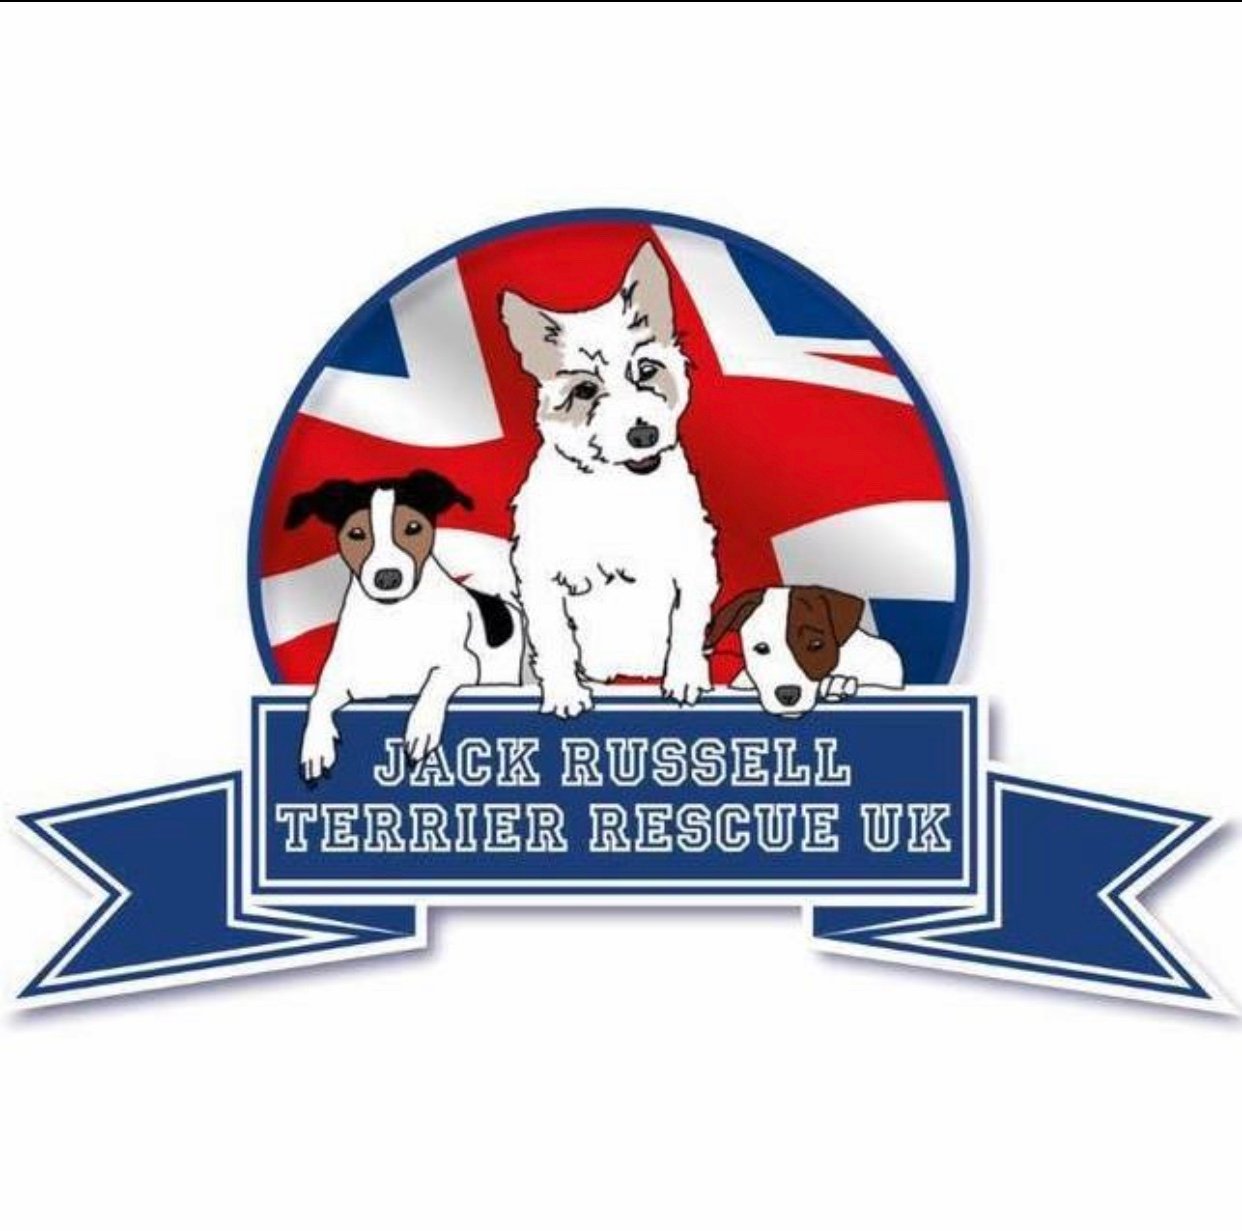 Charity run by volunteers, dedicated to saving JRT's from abandonment, mis-treatment & rehoming unwanted pets. Depends entirely on donations from the public.